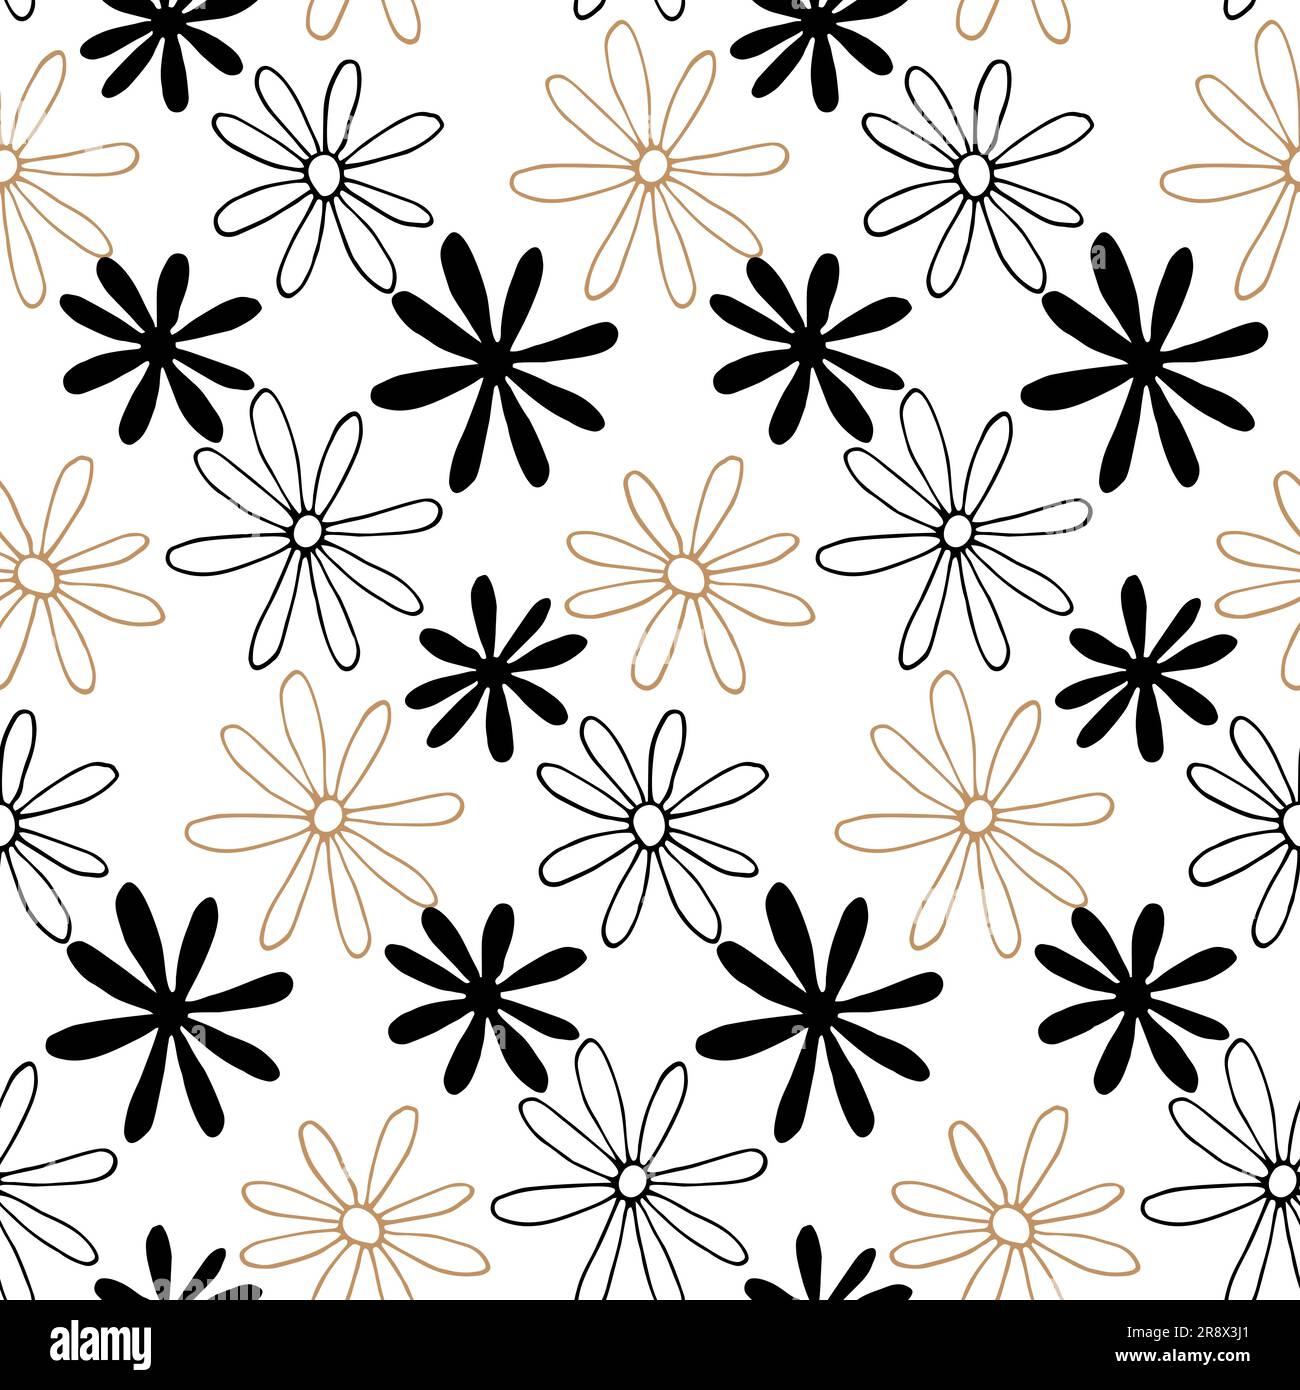 Seamless pattern with daisy flower Stock Vector